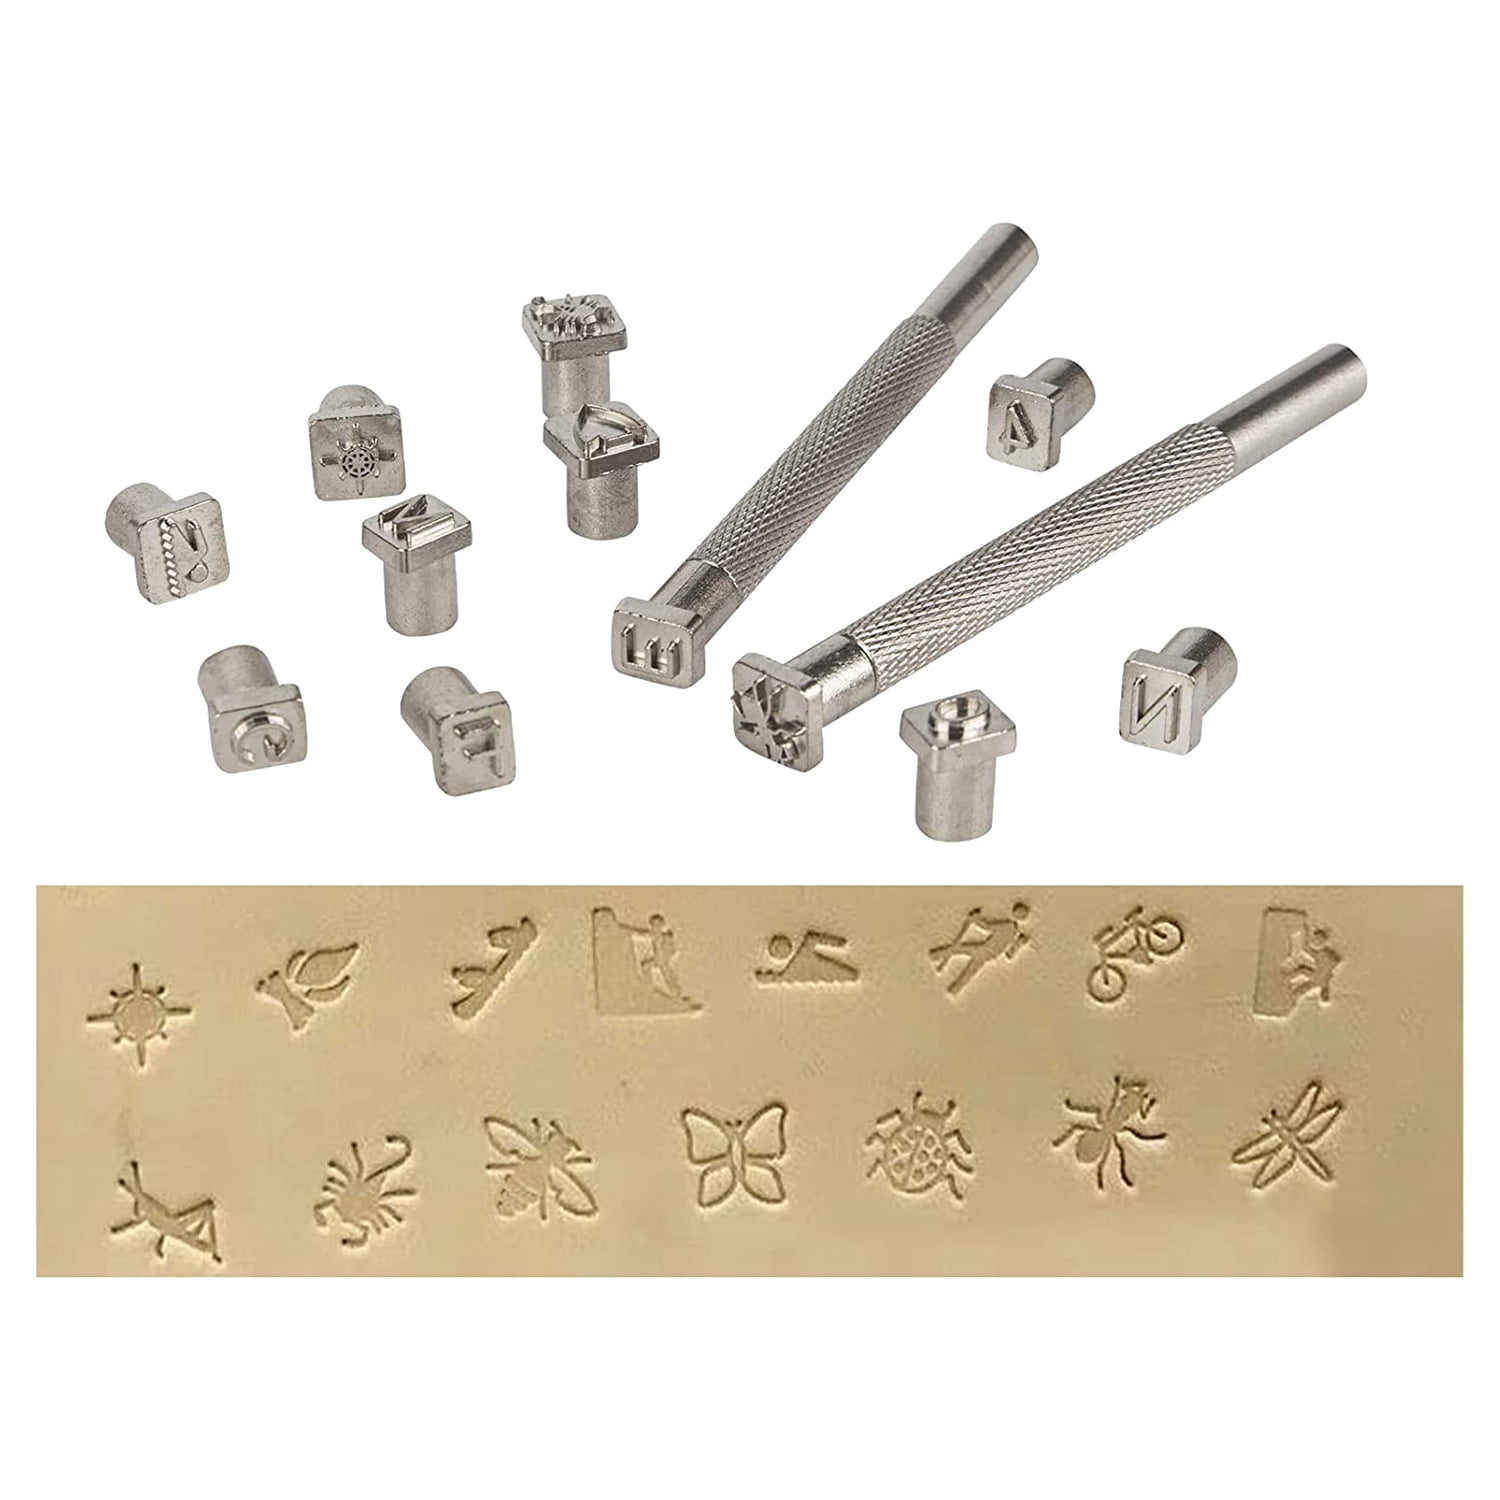 Wholesale letter embossing tool Crafted To Perform Many Other Tasks 